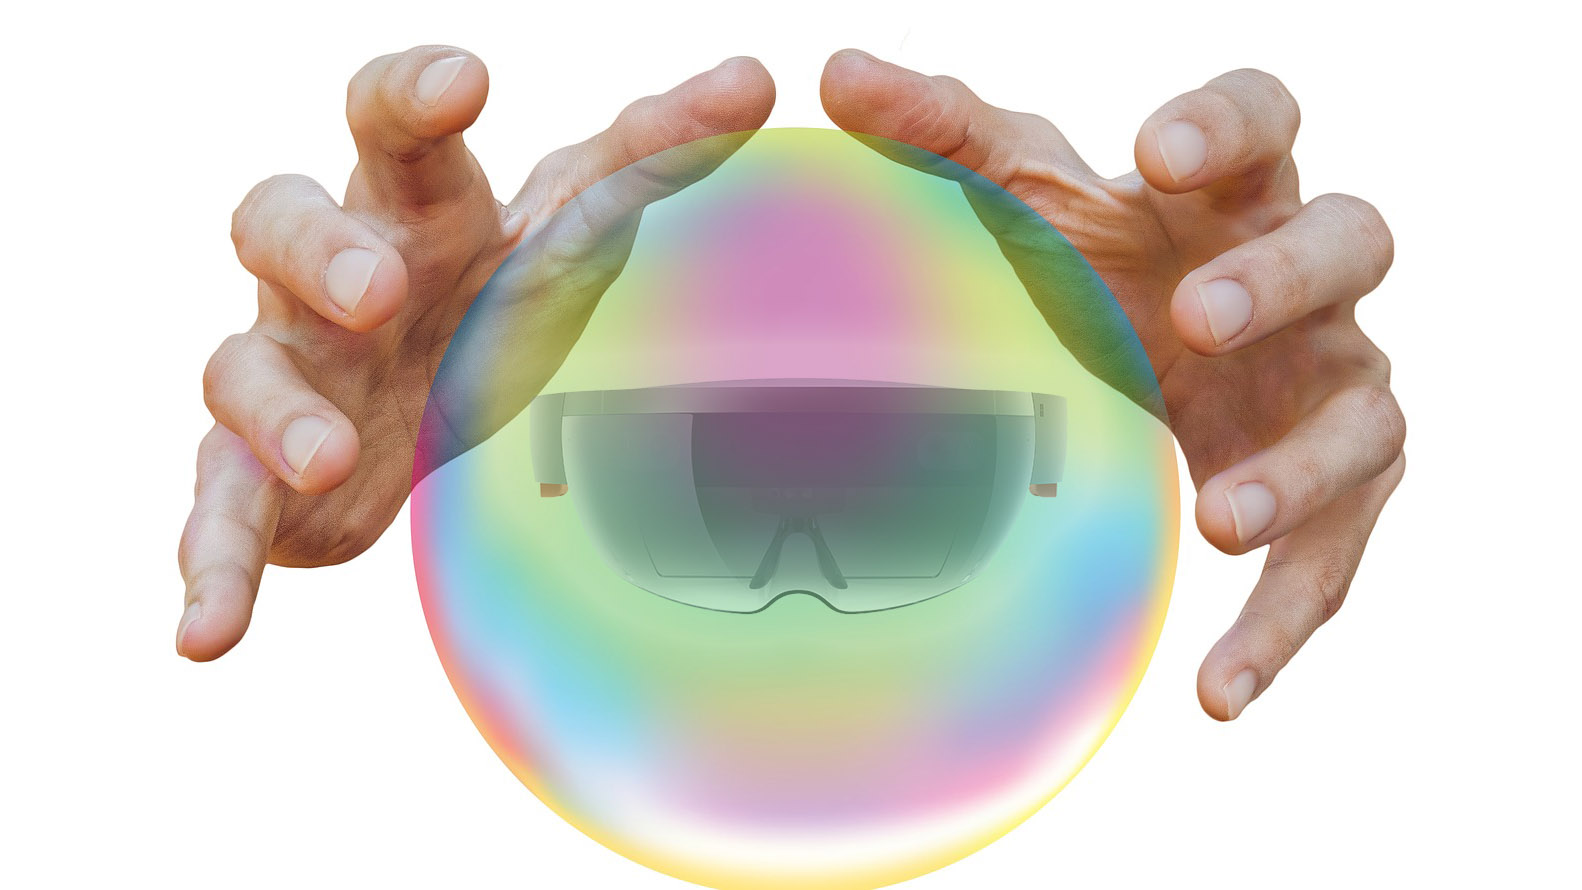 My predictions for augmented reality in 2018